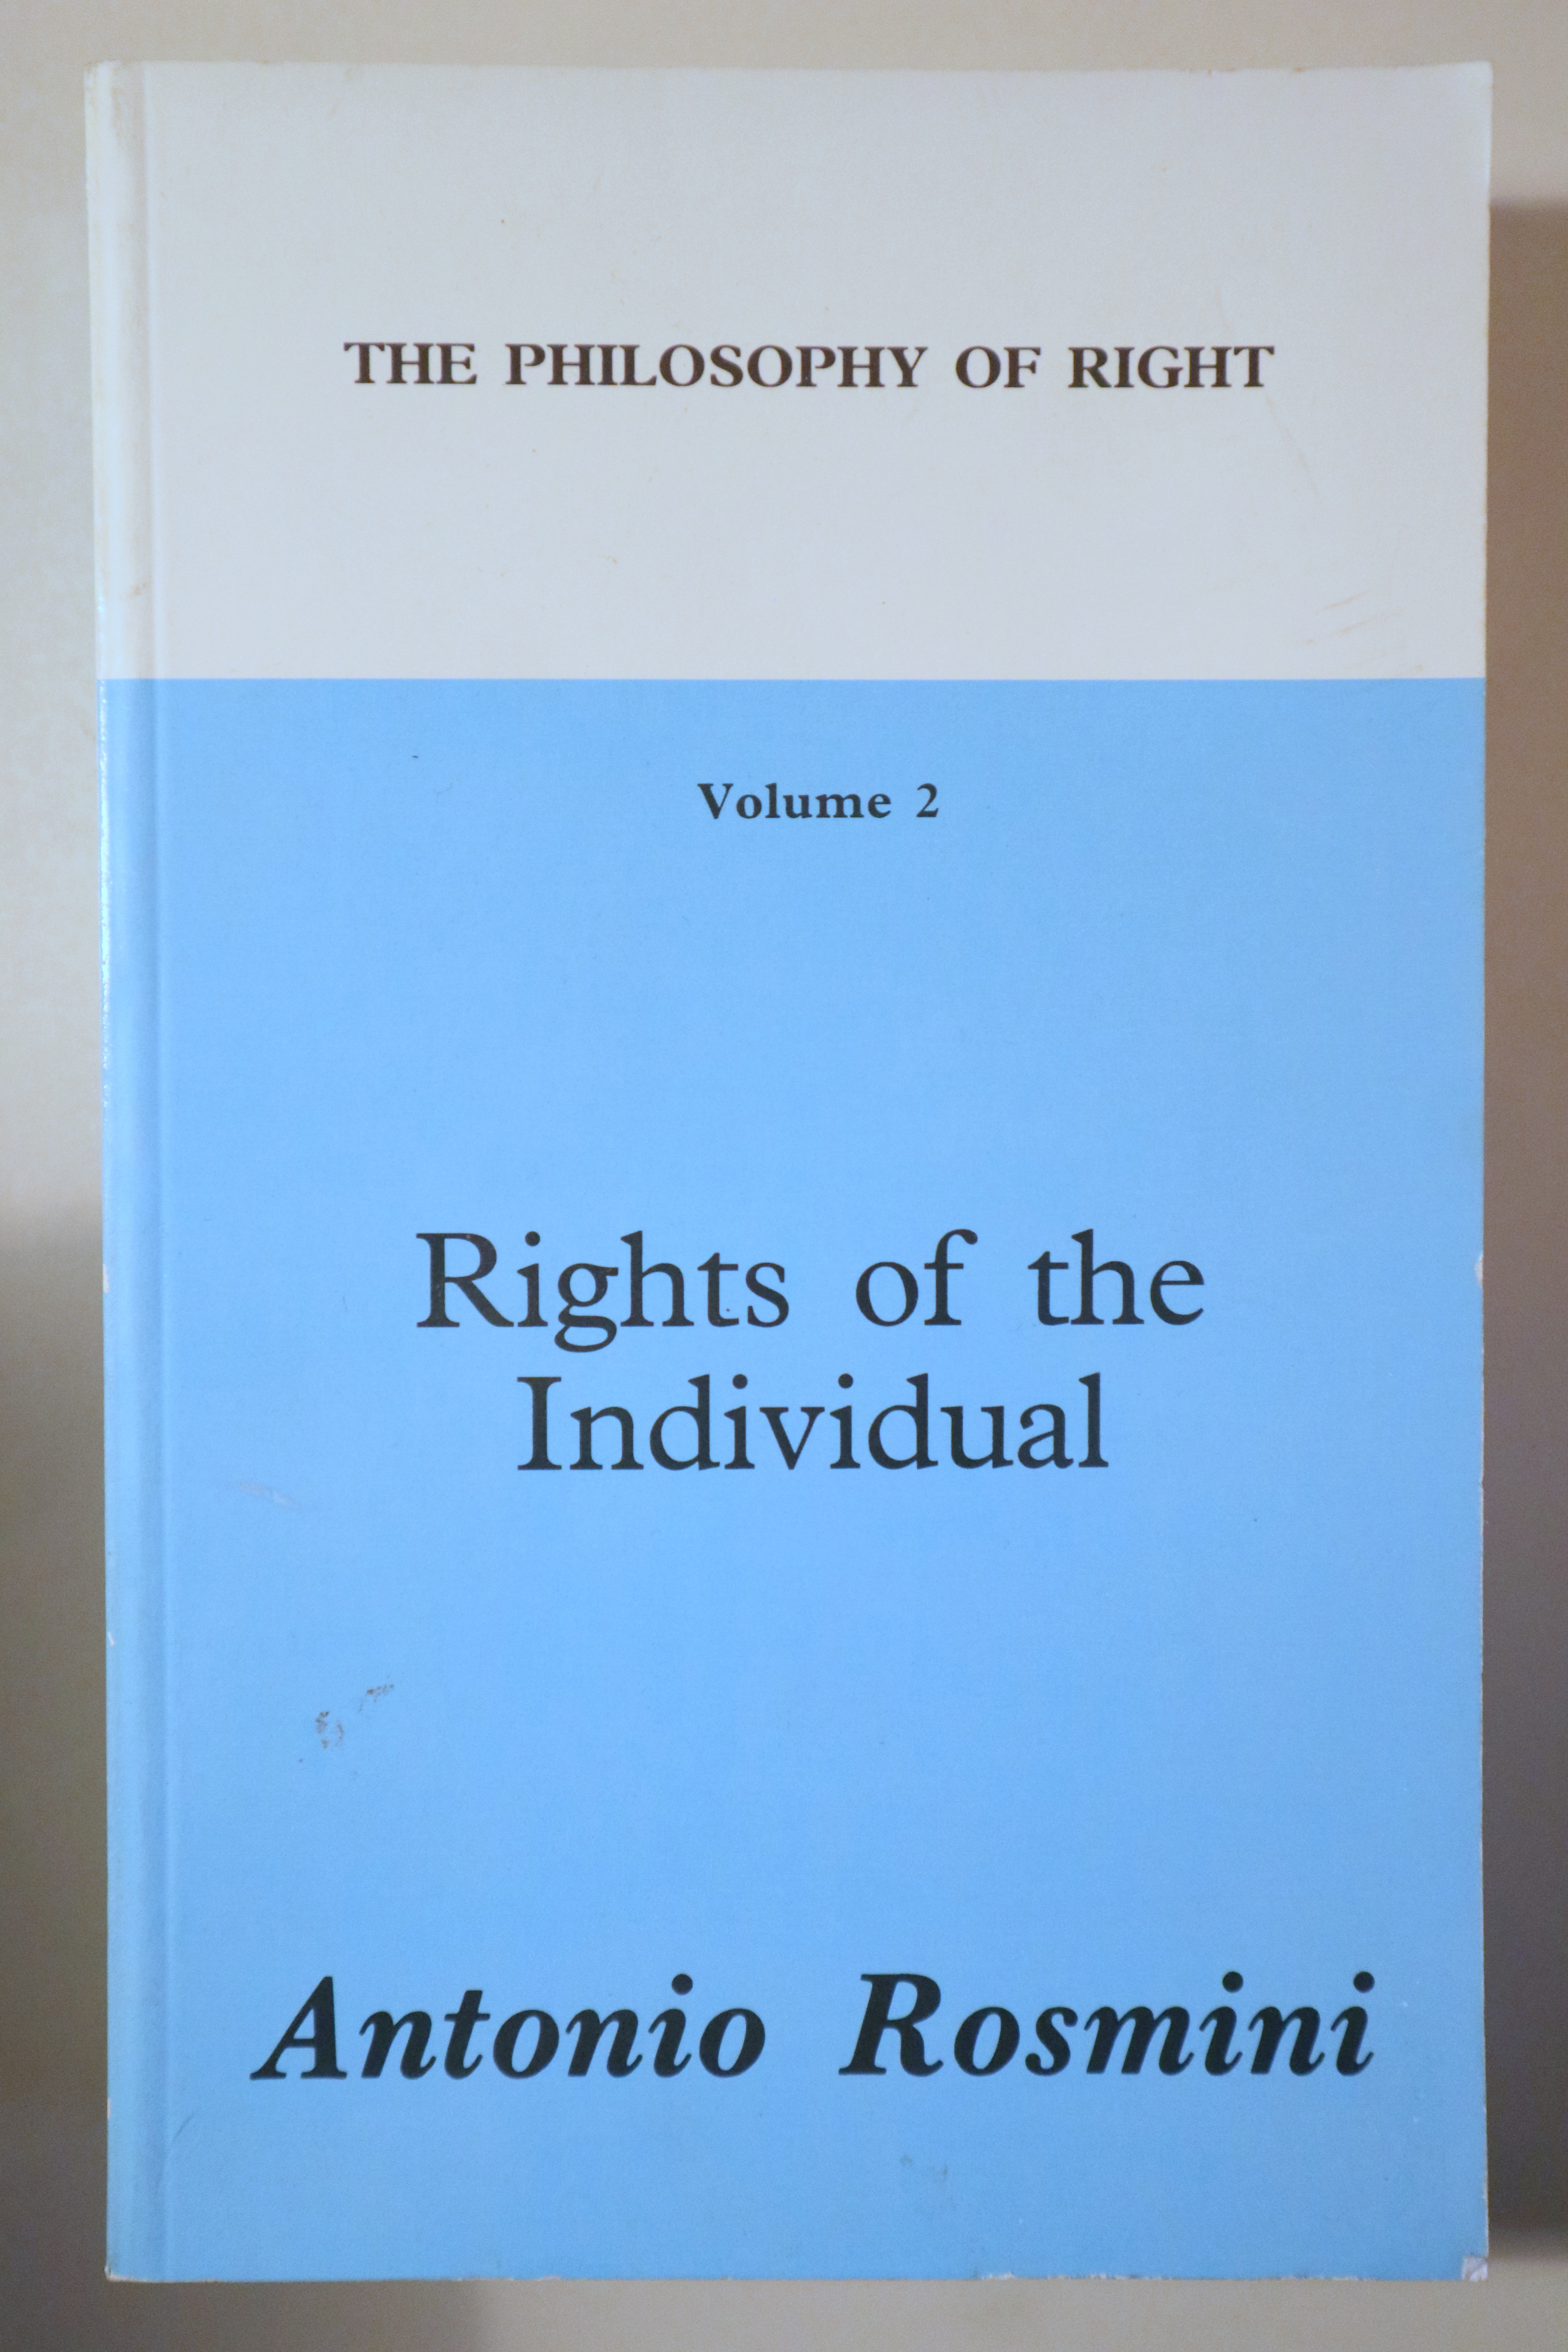 RIGHTS OF THE INDIVIDUAL. The Philosophy of Right vol. 2 - Durham 1993